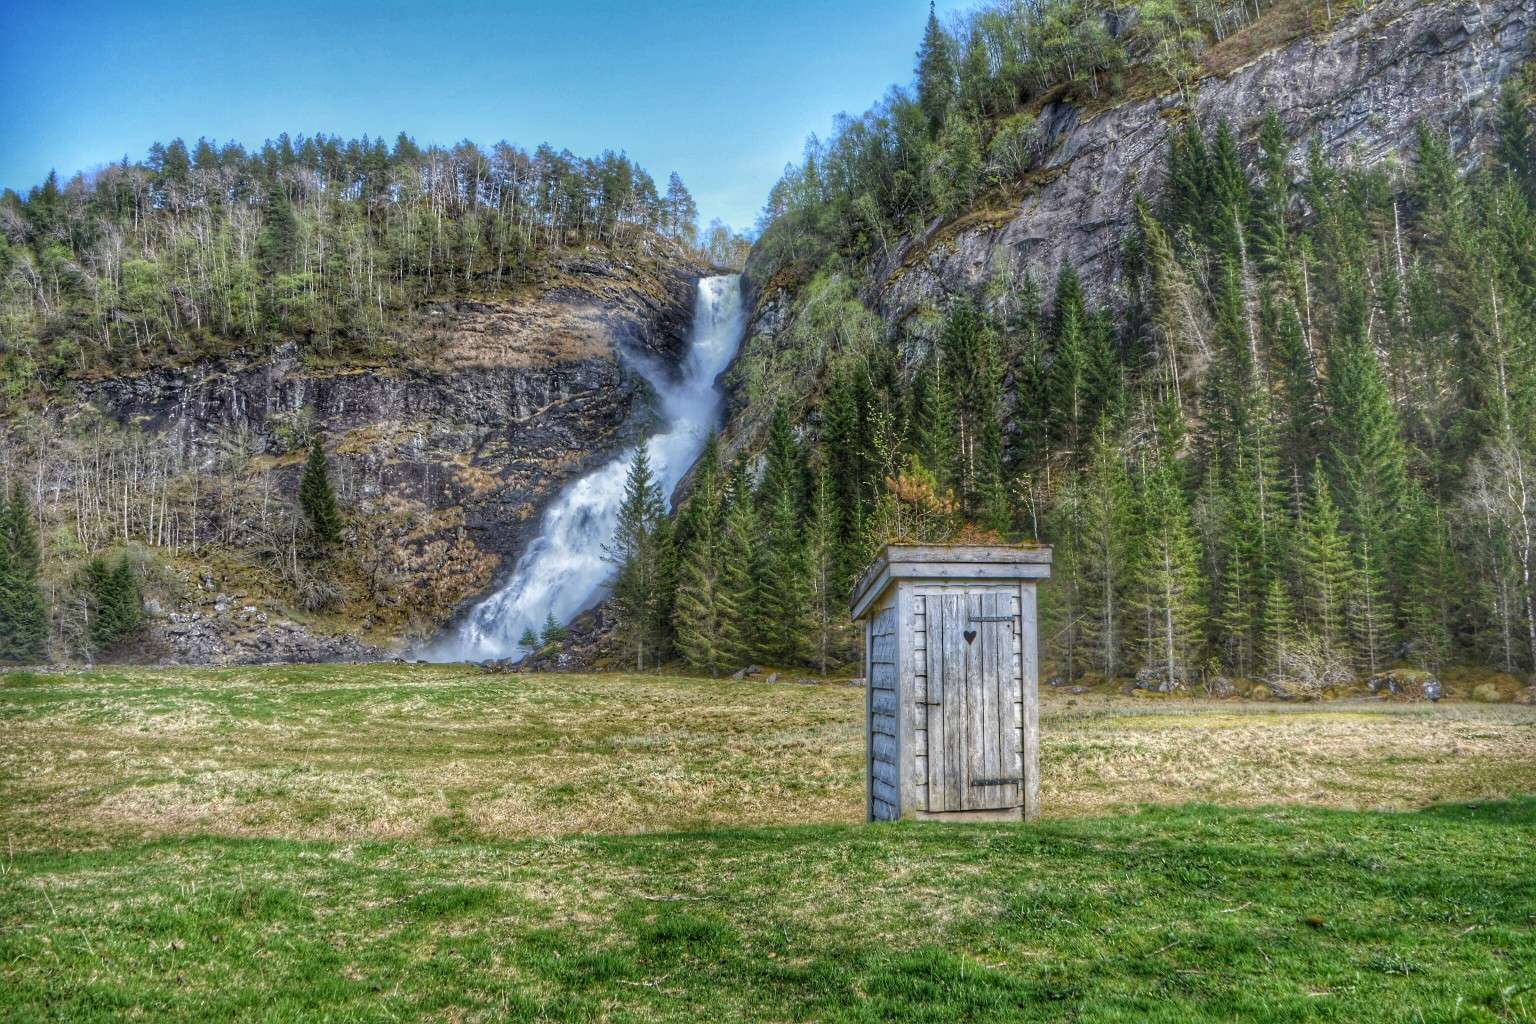 off grid toilet outhouse with waterfall in background